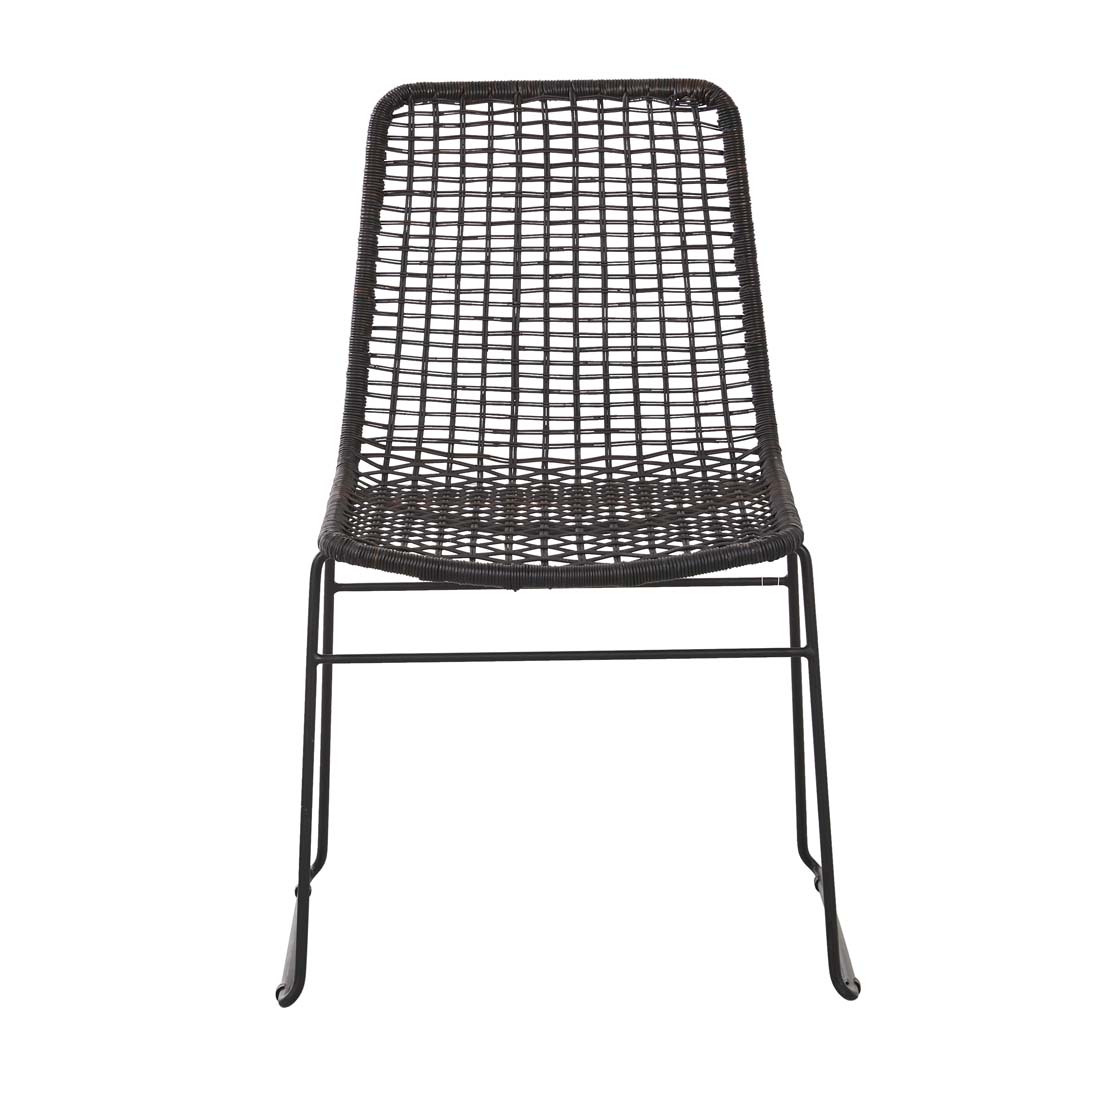 Olivia Open Weave Dining Chair image 0